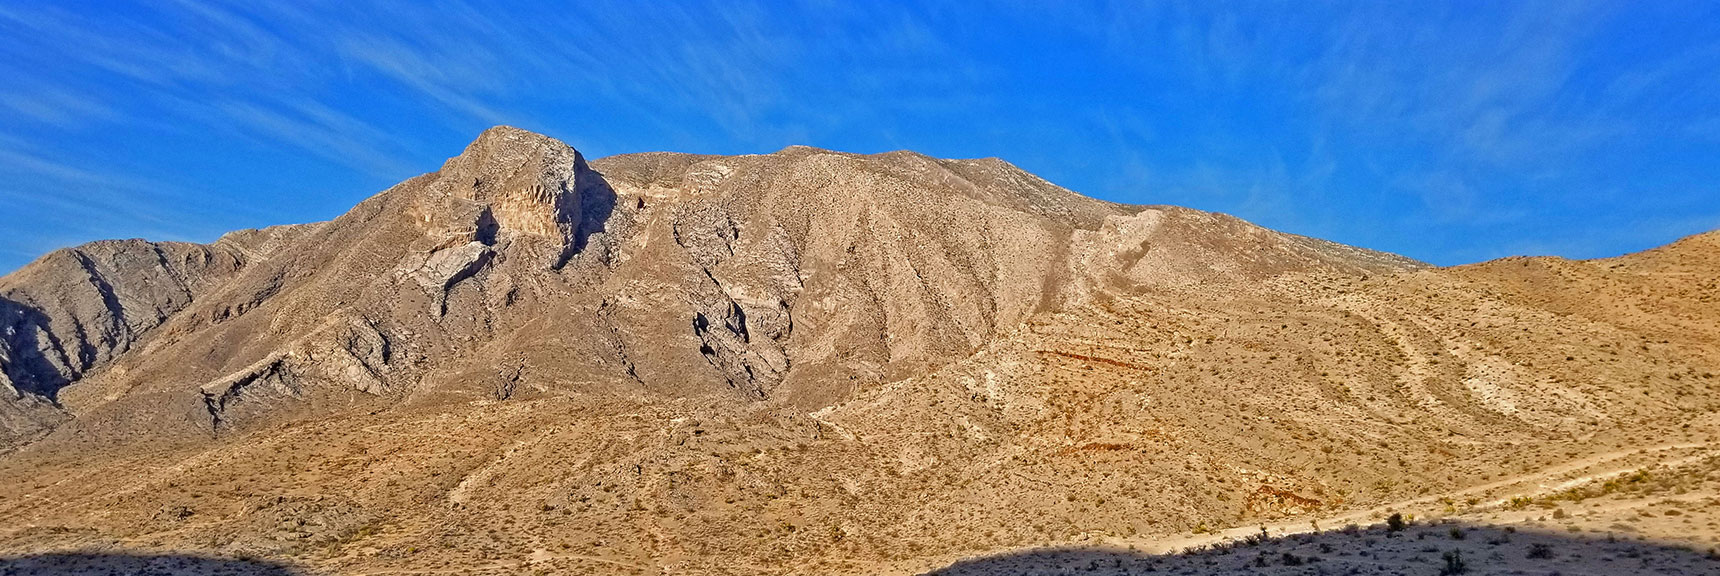 Low Point on Summerlin Ridge (to right) is a Gully Approach Opposite Side | Cheyenne Mountain | Las Vegas, Nevada